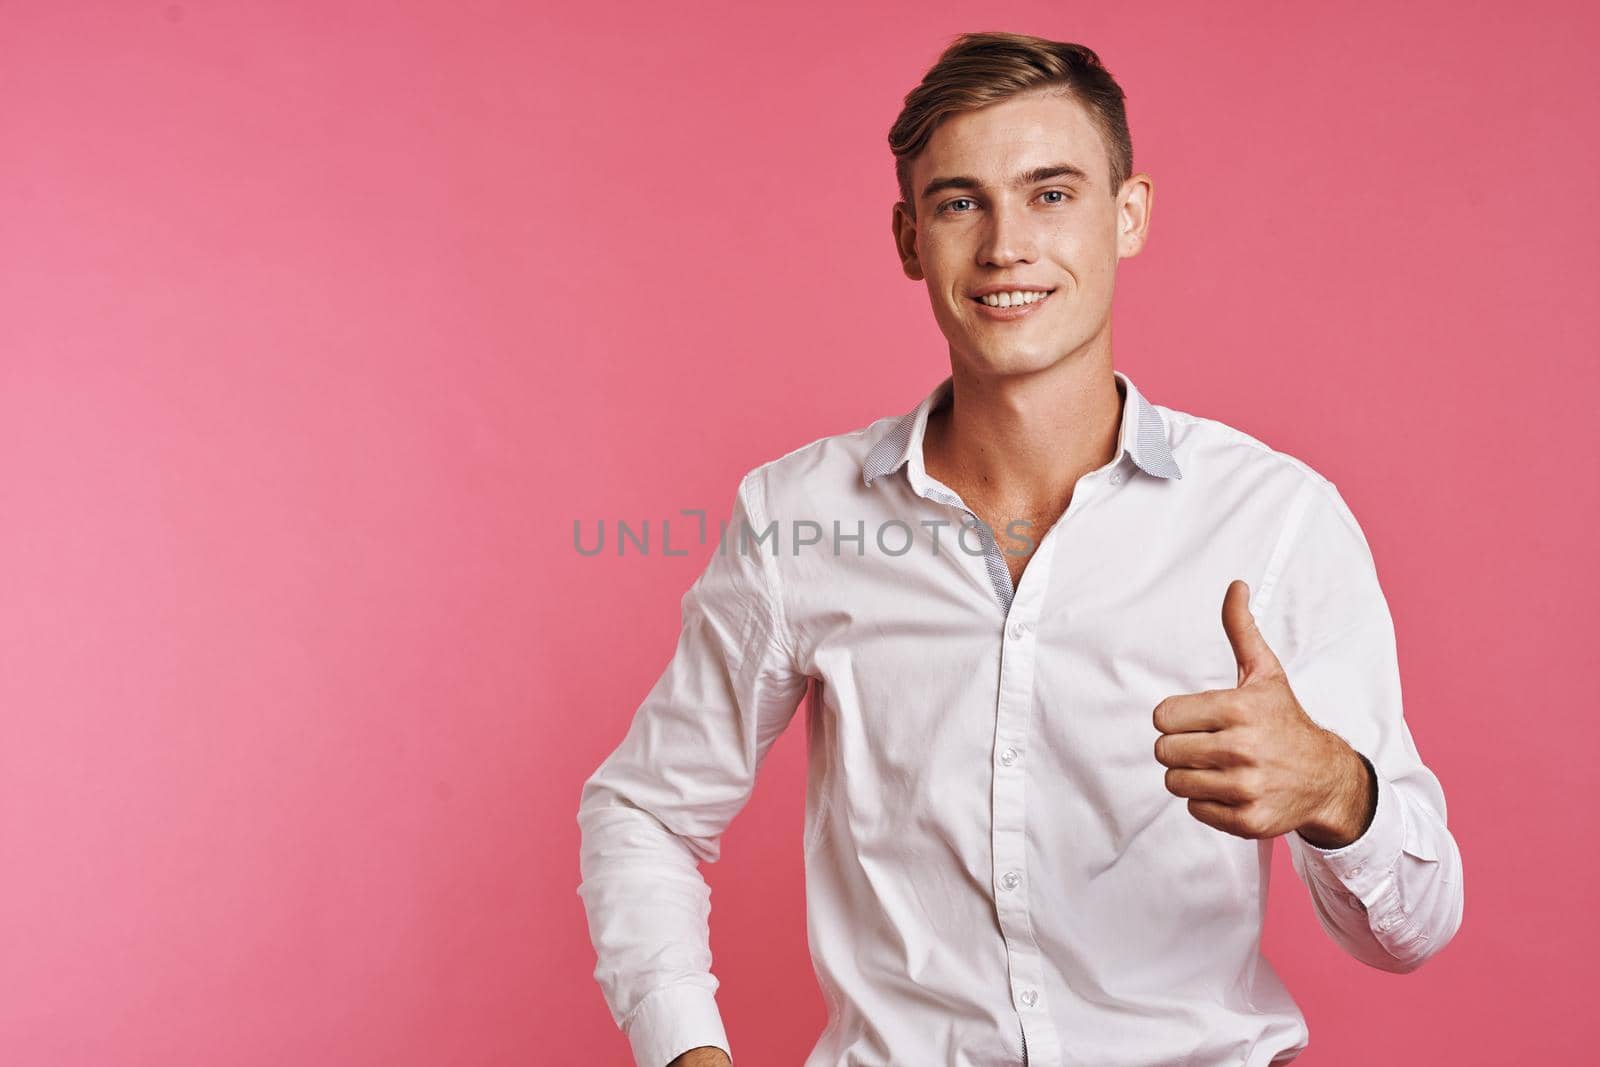 businessmen fashion hairstyle hand gestures modern style studio lifestyle. High quality photo